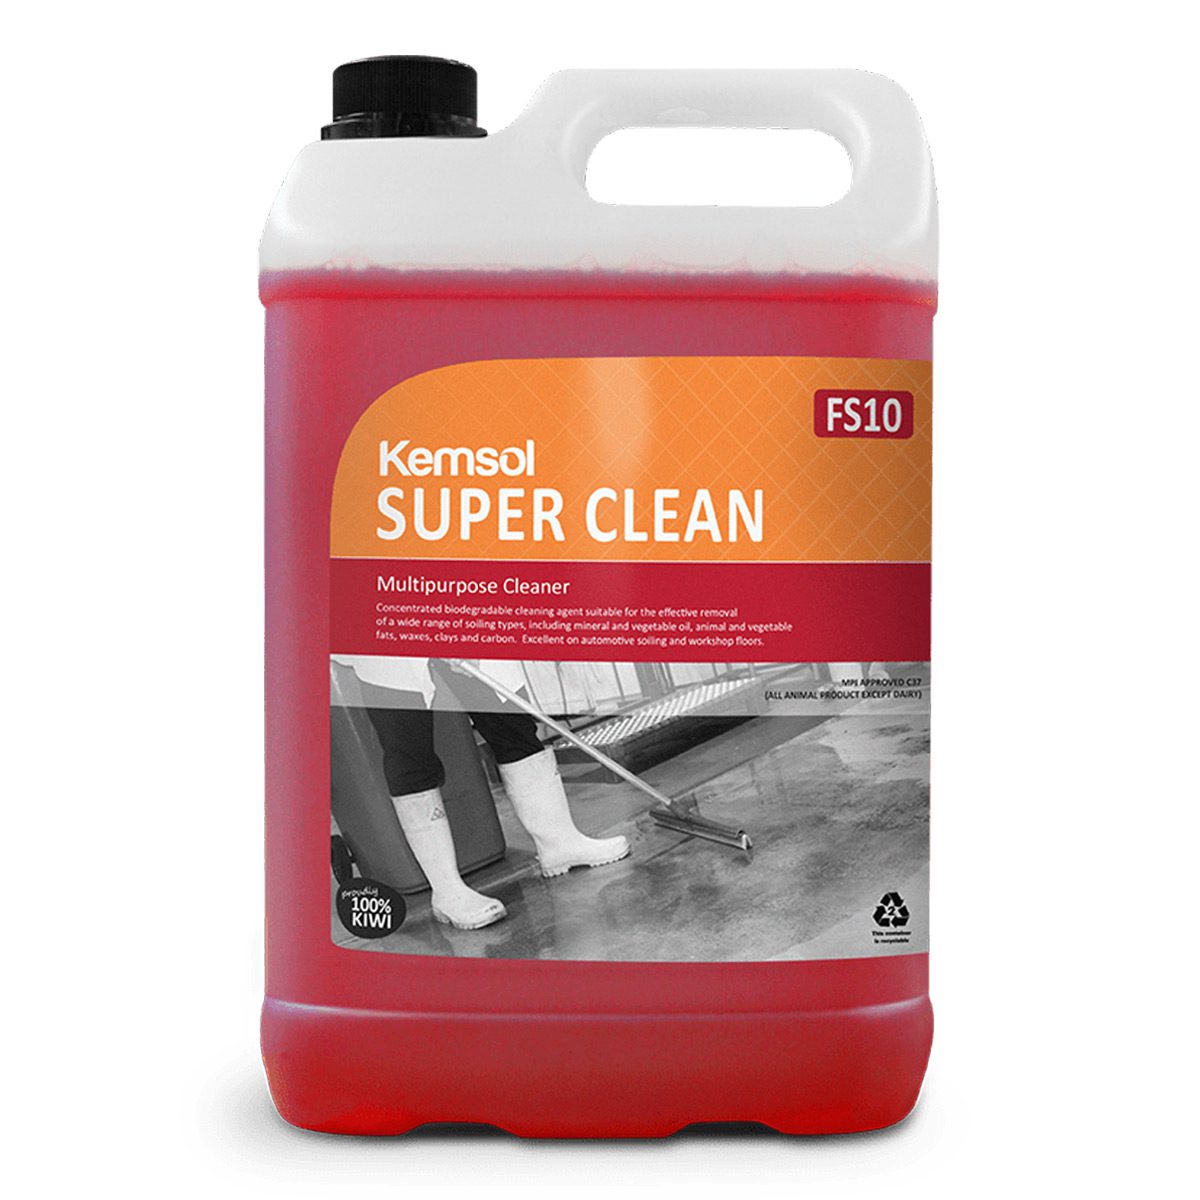 cleaning-products-kitchen-multipurpose-kemsol-supe-clean-multipurpose-cleaner-concentrated-biodegradable-cleaning-agent-for-effective-removal-soiling-types-vjs-distributors-KSUPCCSKU